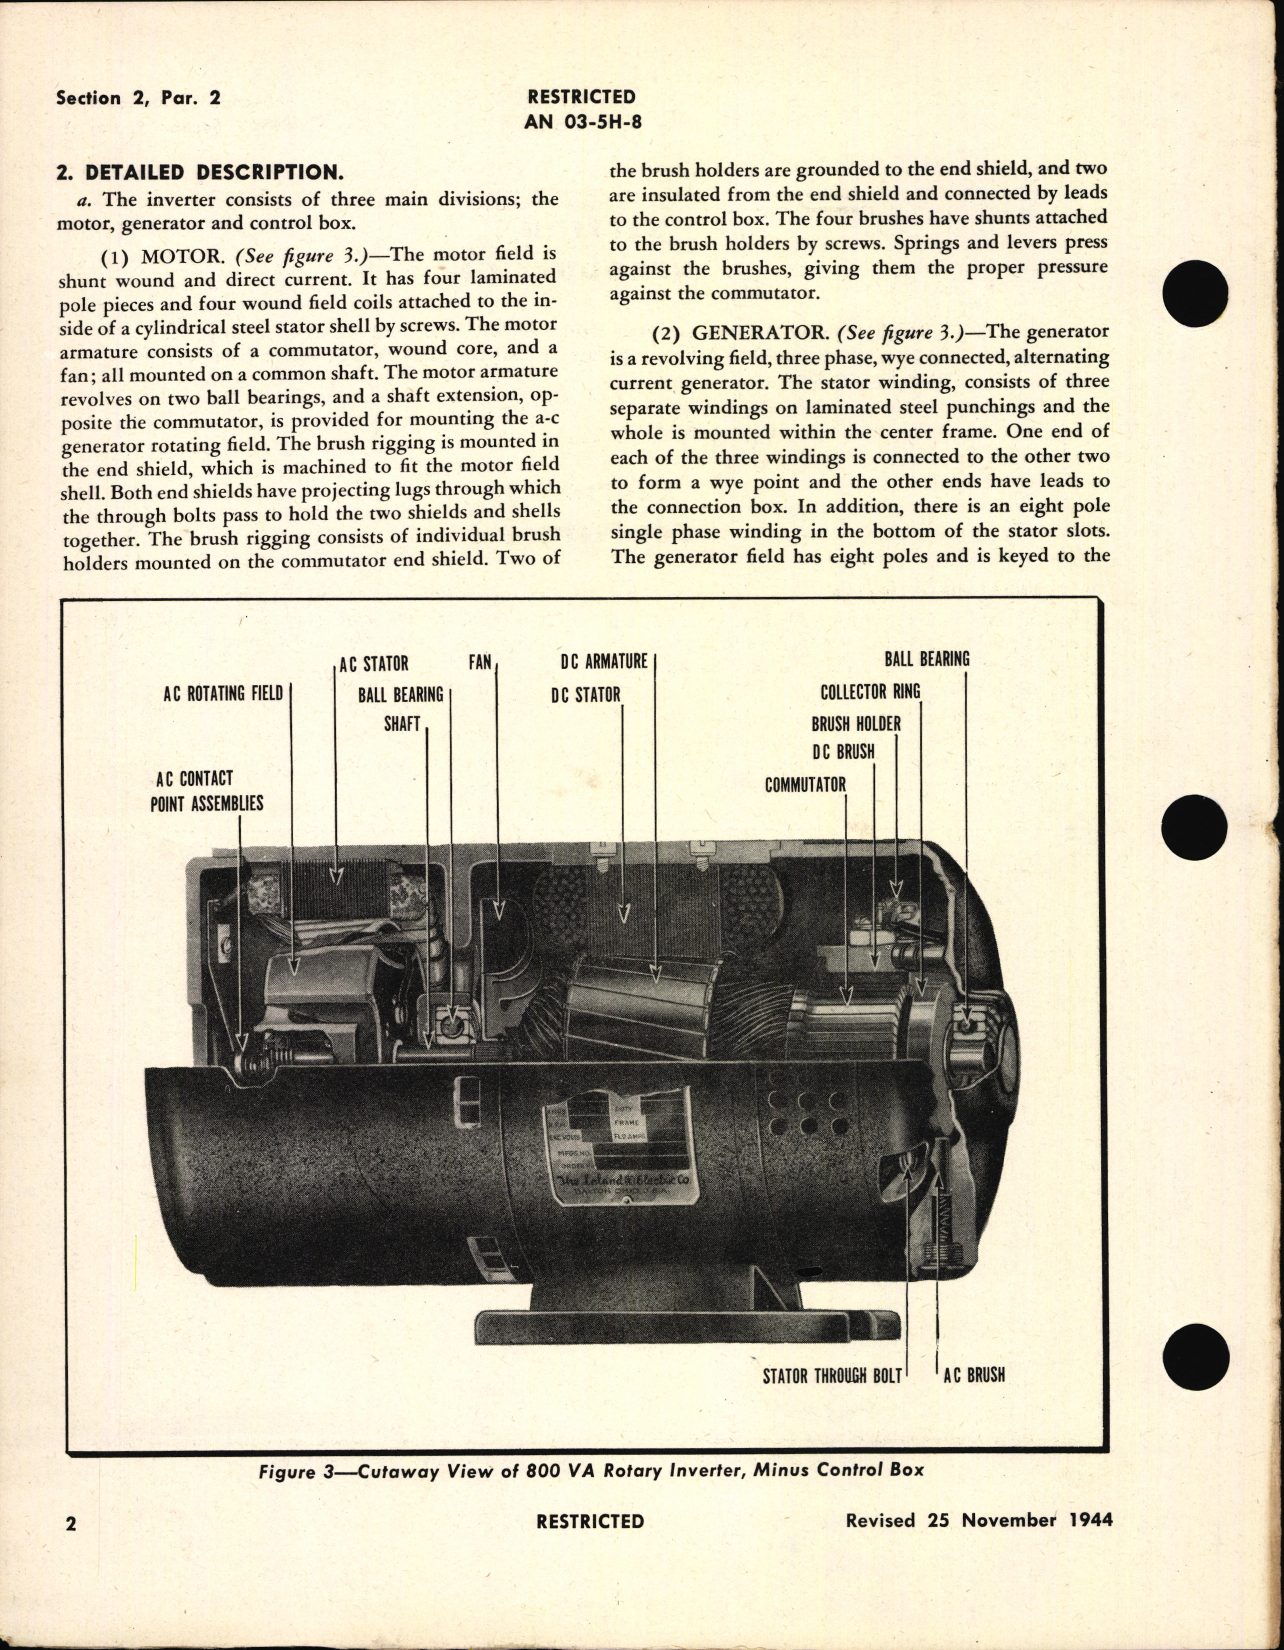 Sample page 6 from AirCorps Library document: Handbook of Instructions with Parts Catalog for 800 VA Rotary Inverter